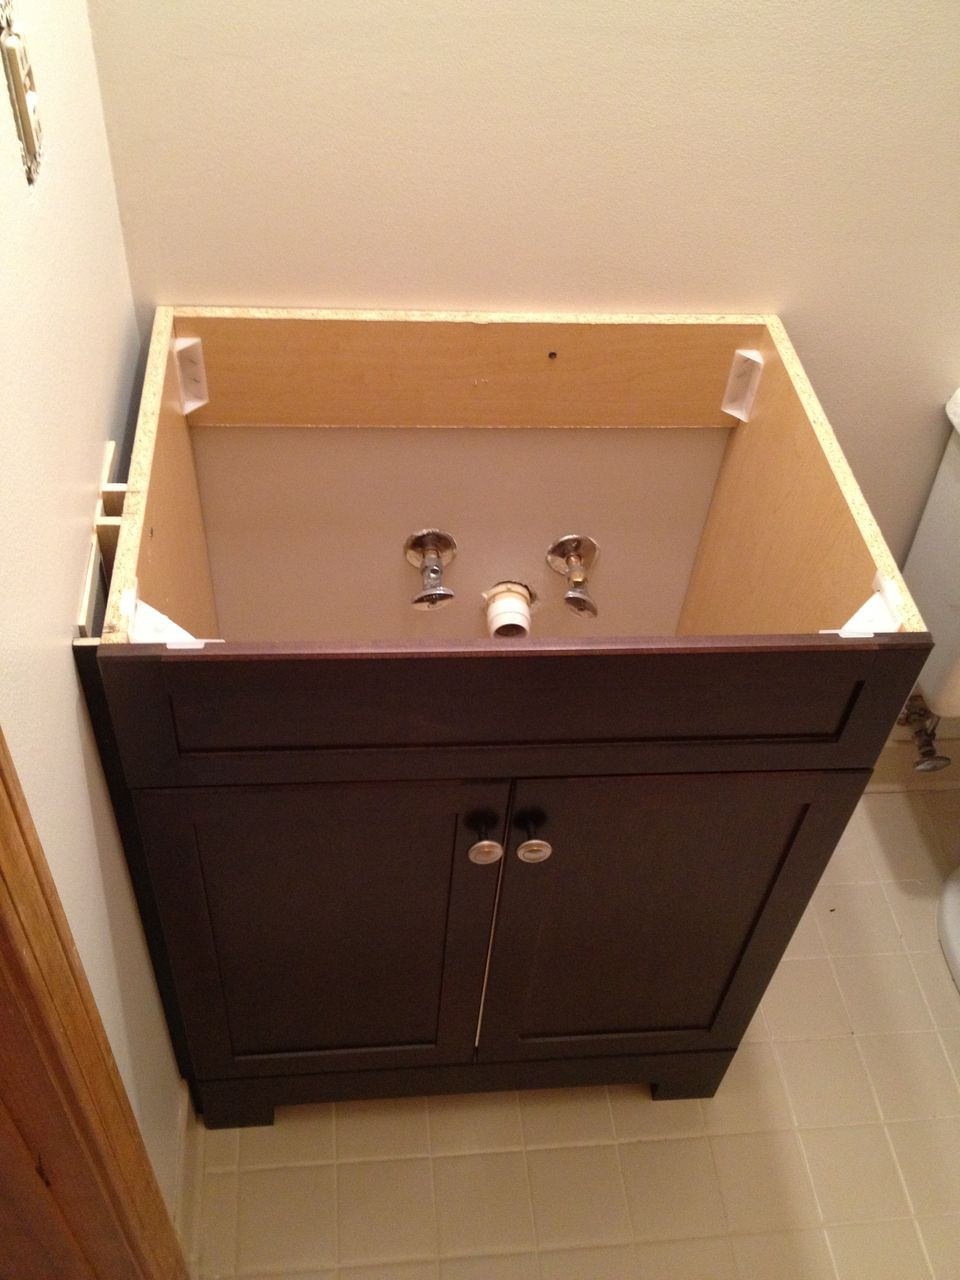 Installing A Bathroom Vanity
 How to Replace and Install a Bathroom Vanity